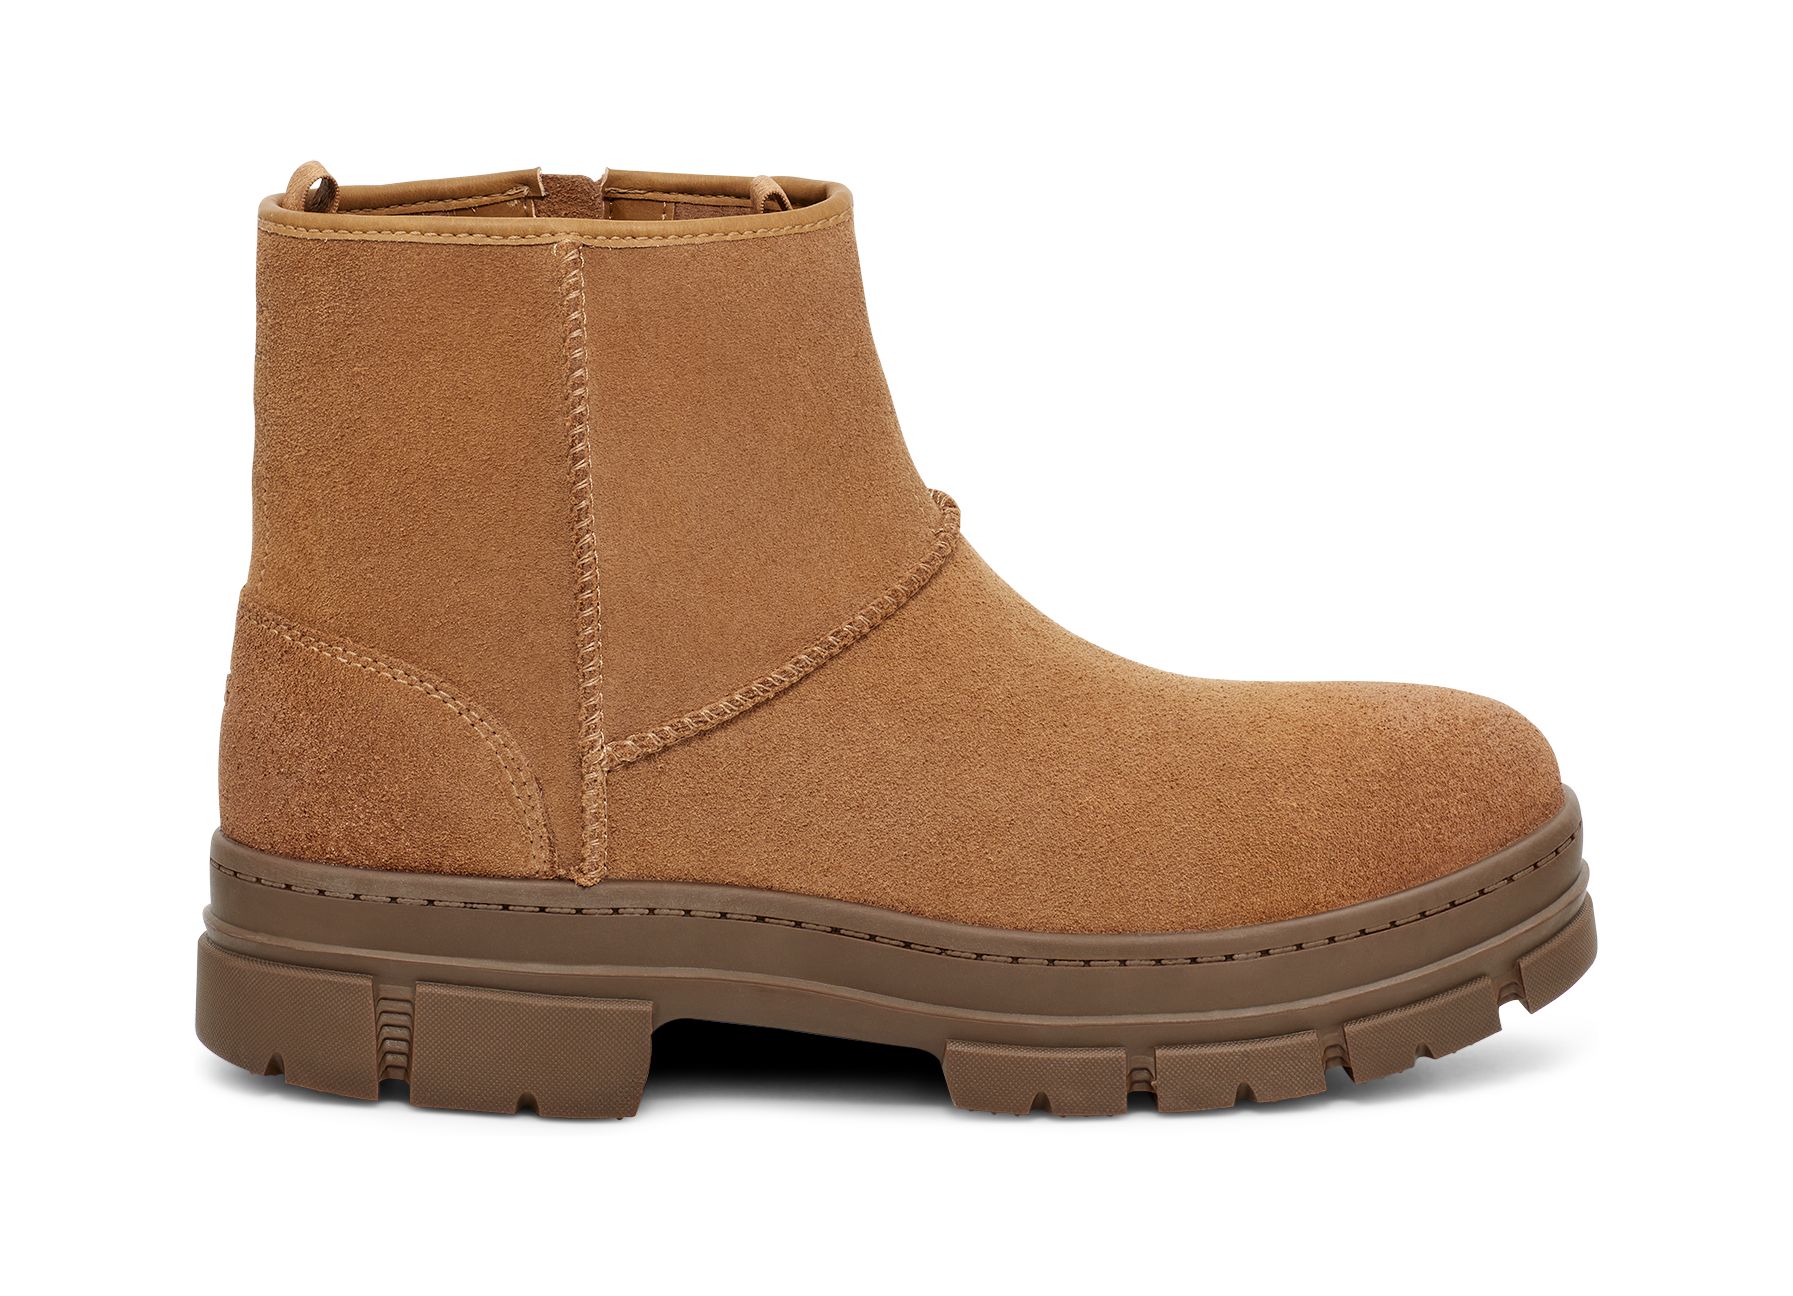 UGG Men's Skyview Classic Pull-On Suede Boots in Chestnut Suede, Size 10 | UGG (US)